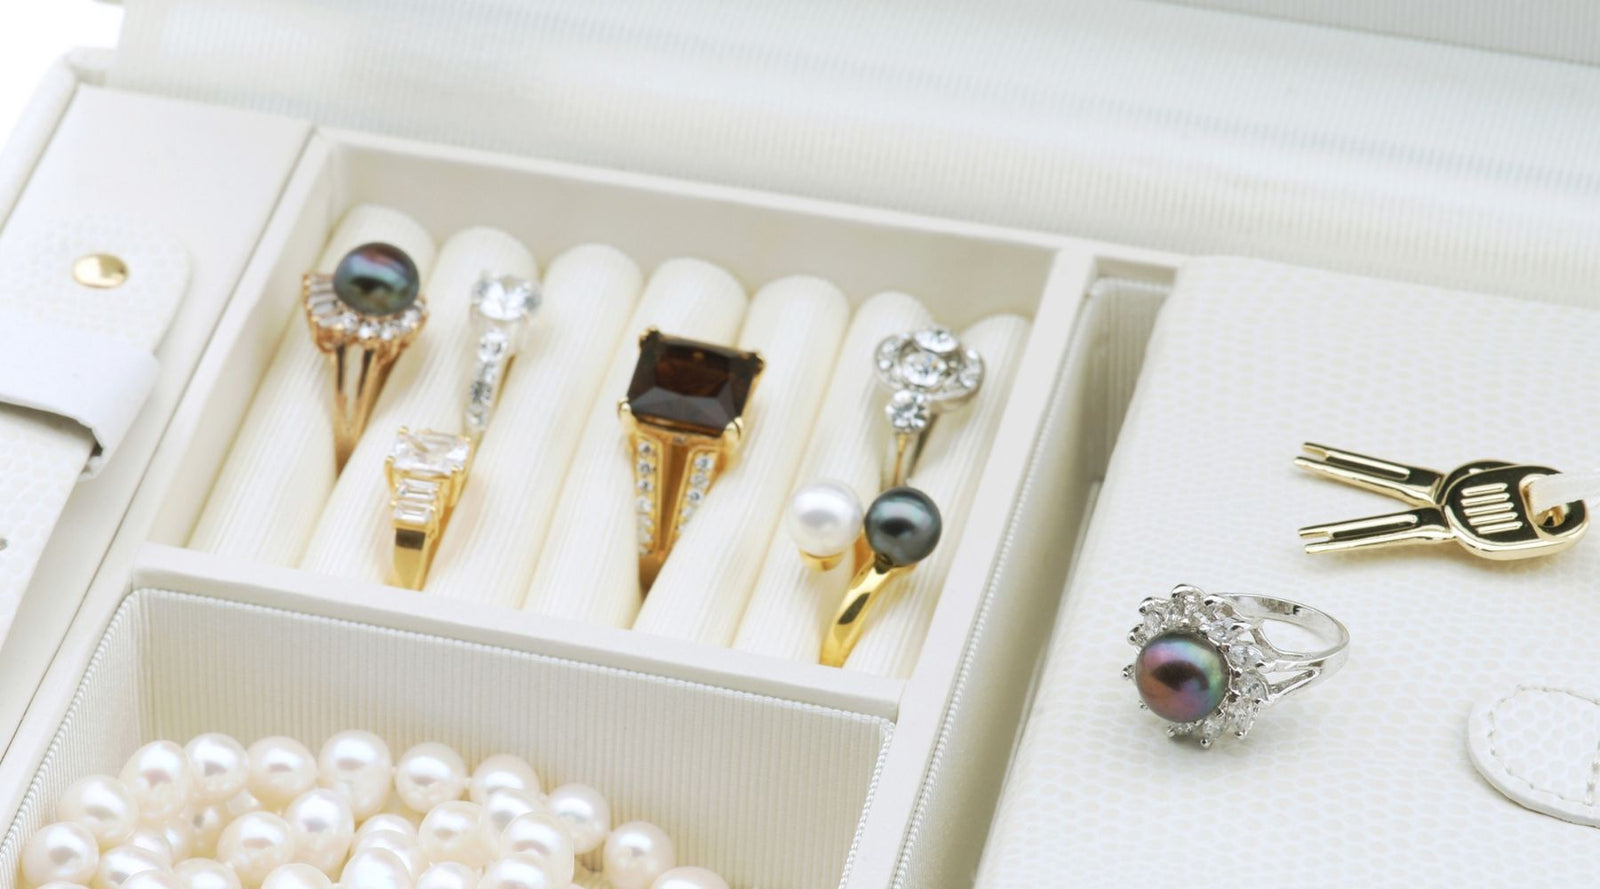 9 Modest Jewelry Ideas to Wear with Funeral Attire